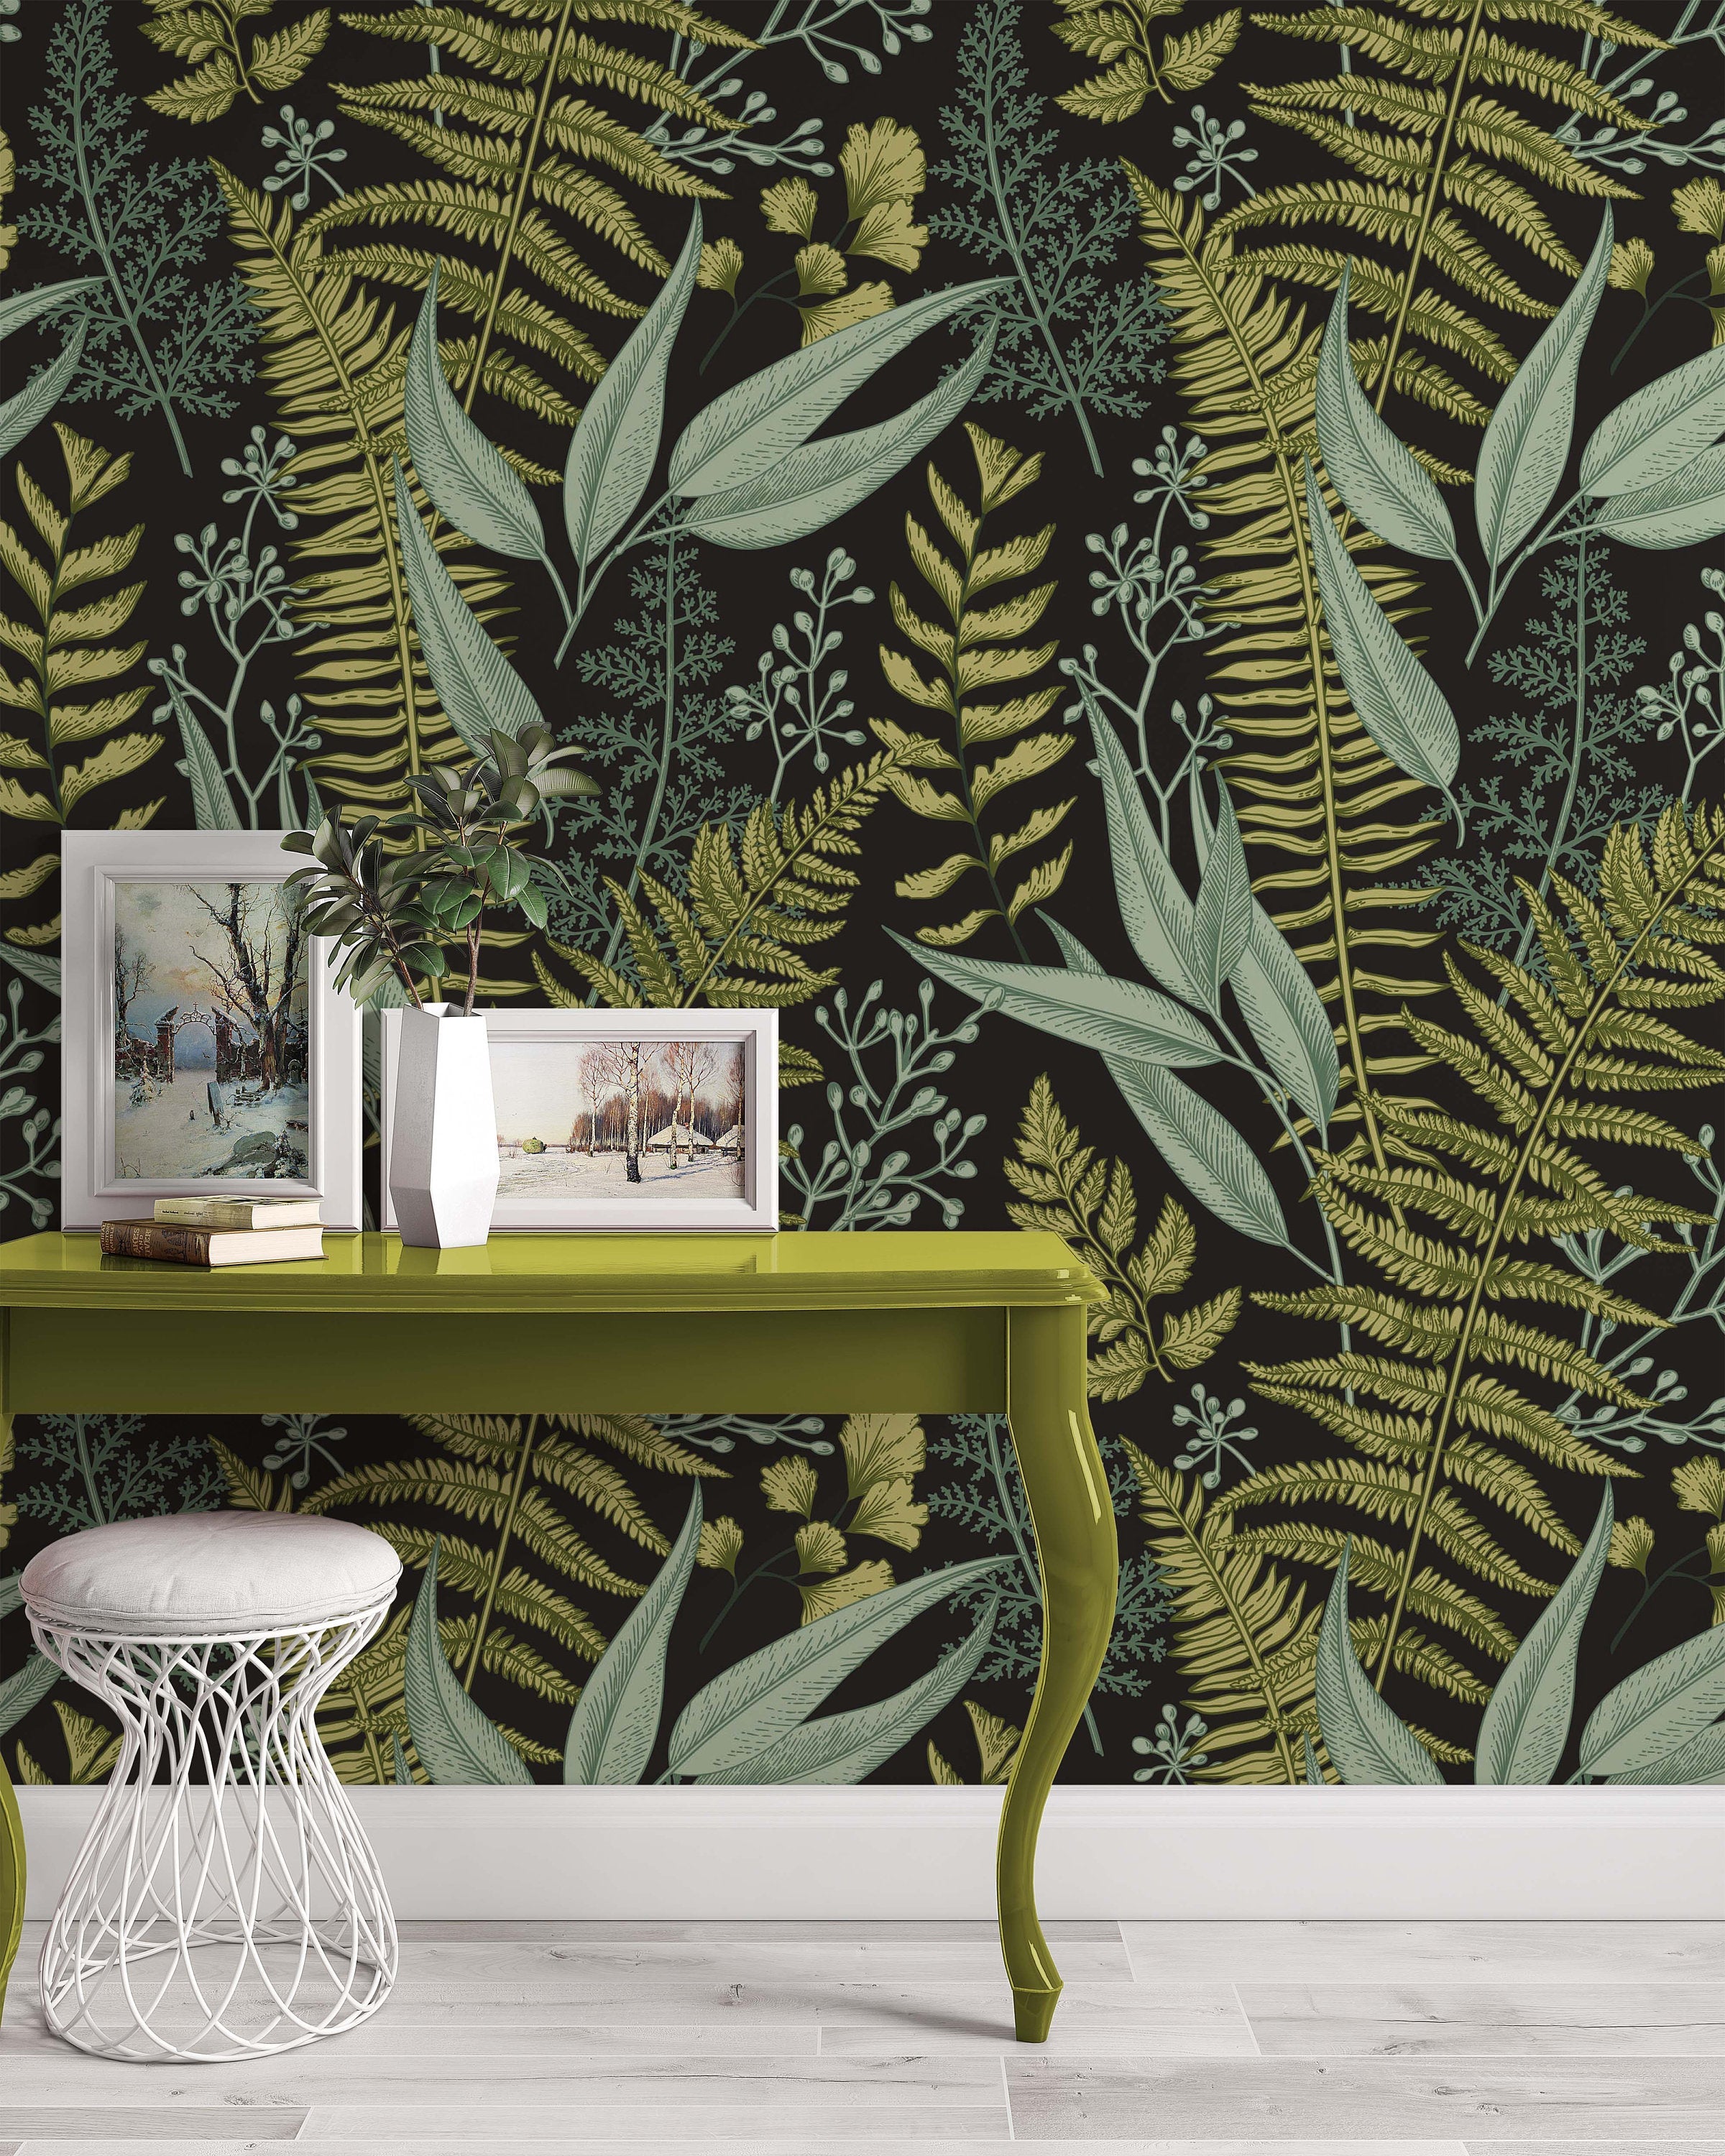 Floral Pattern Vintage Style Leaves Exotic Tropical Plants Wallpaper Restaurant Living Room Cafe Office Bedroom Mural Home Wall Art